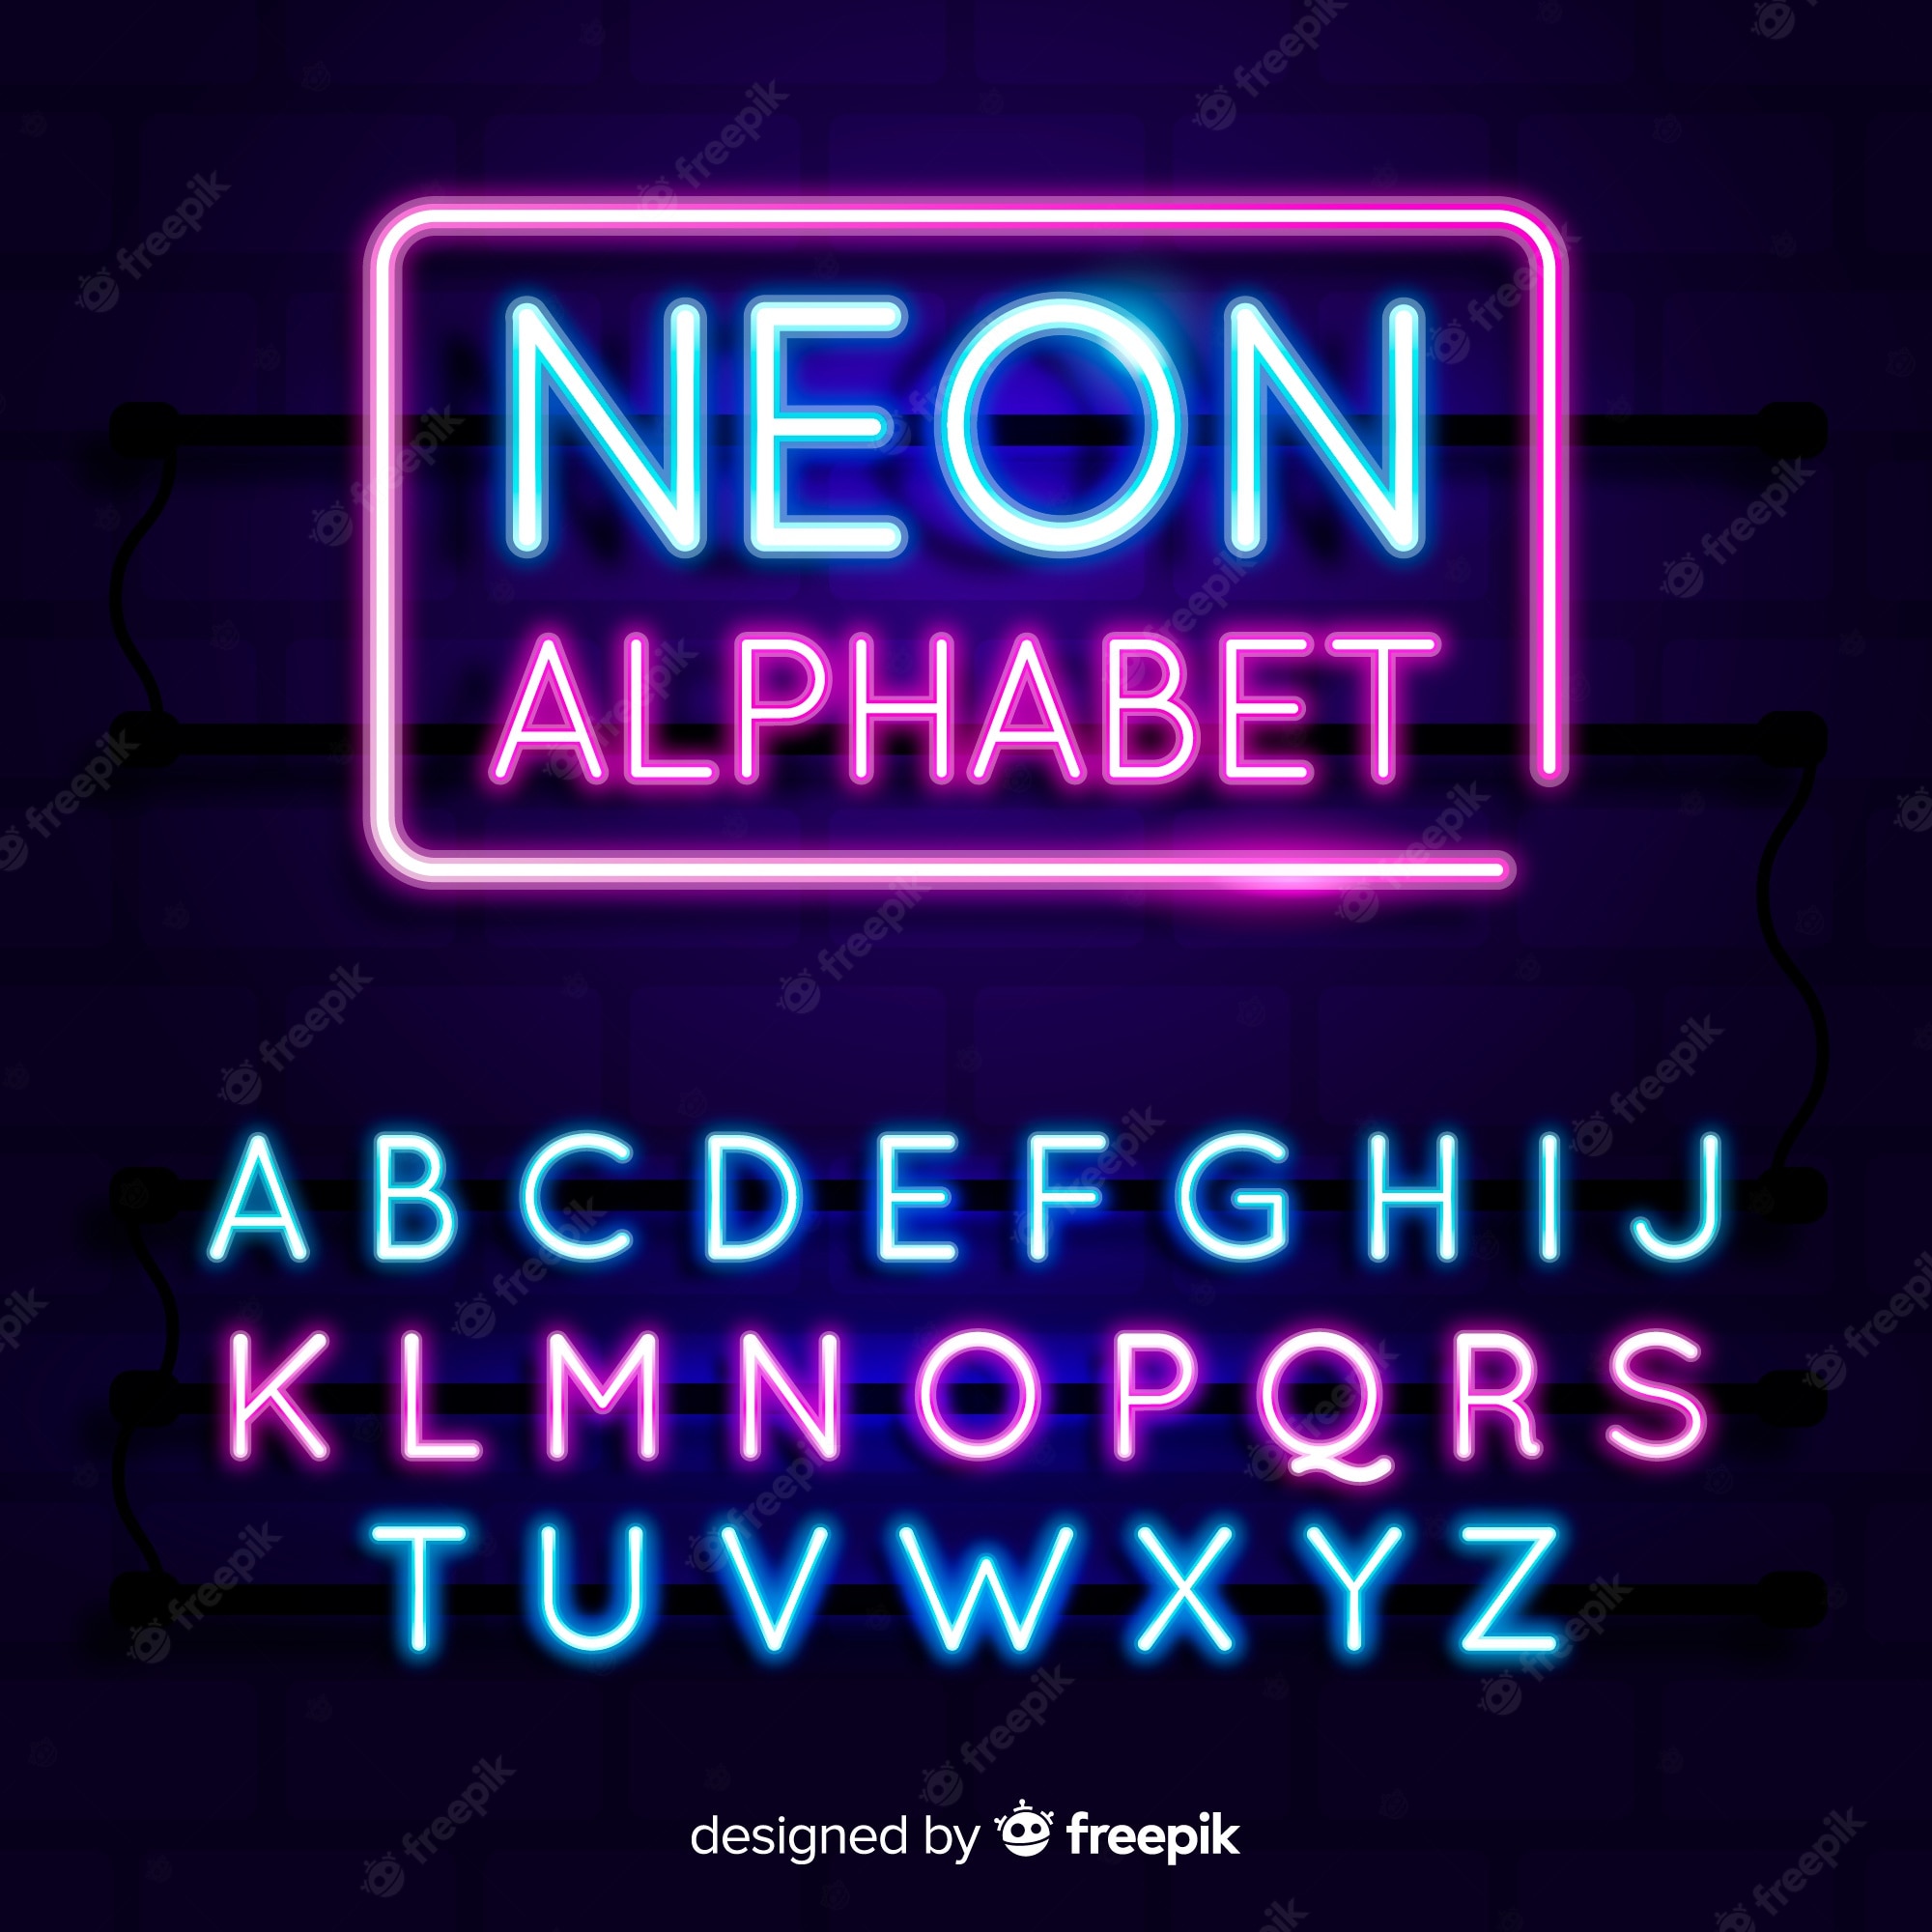 Neon Text Wallpapers